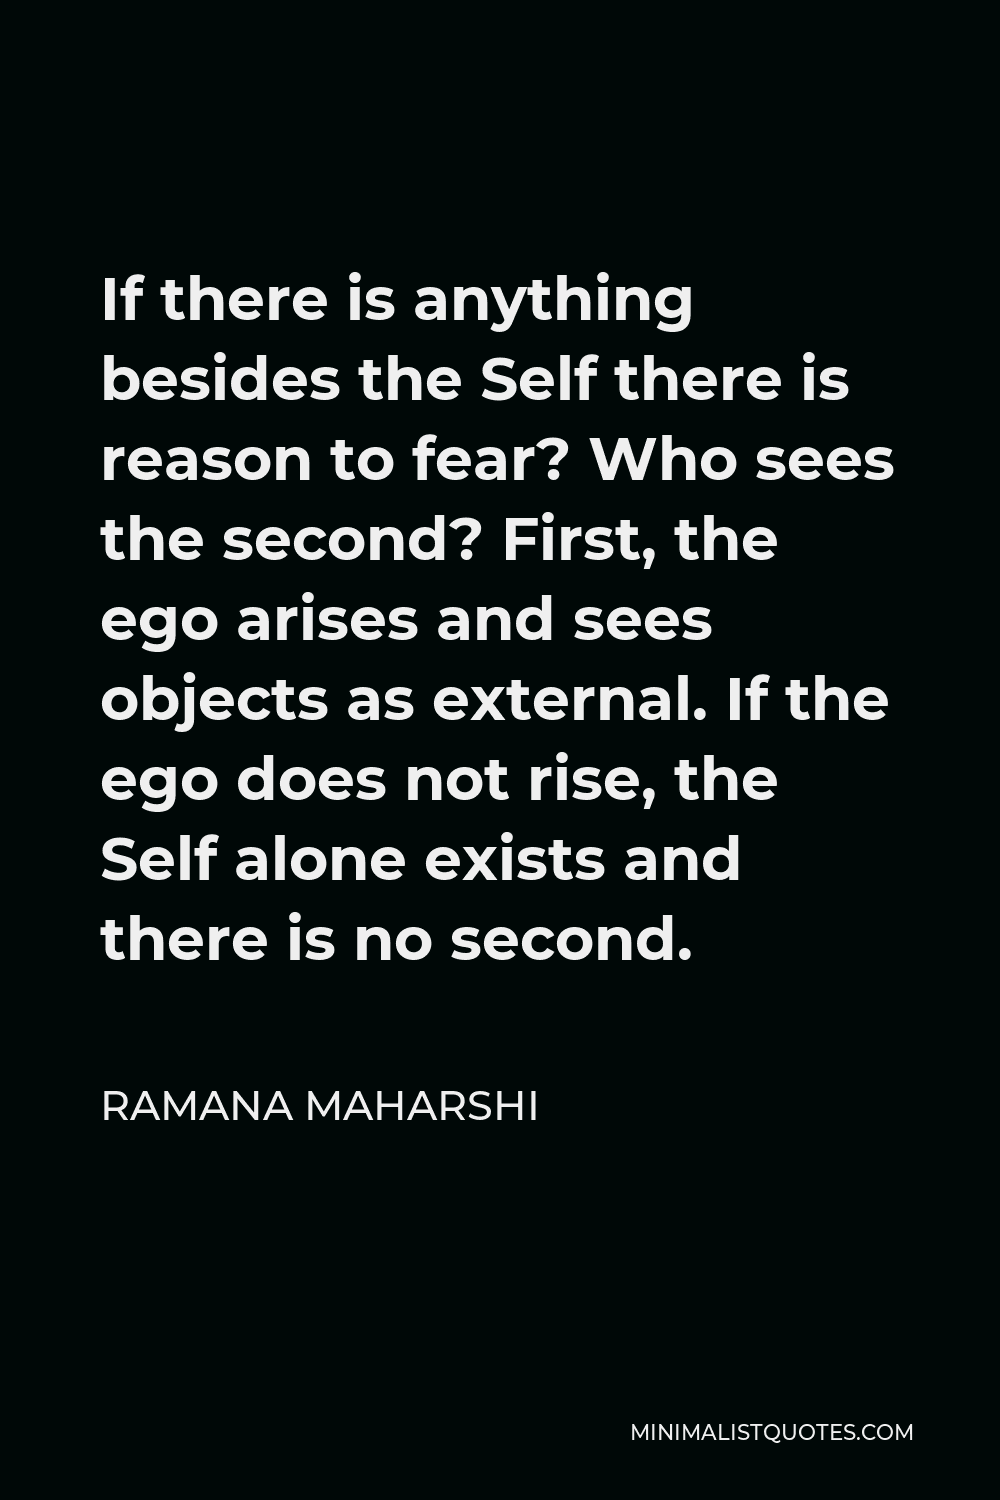 Ramana Maharshi Quote - If there is anything besides the Self there is reason to fear? Who sees the second? First, the ego arises and sees objects as external. If the ego does not rise, the Self alone exists and there is no second.